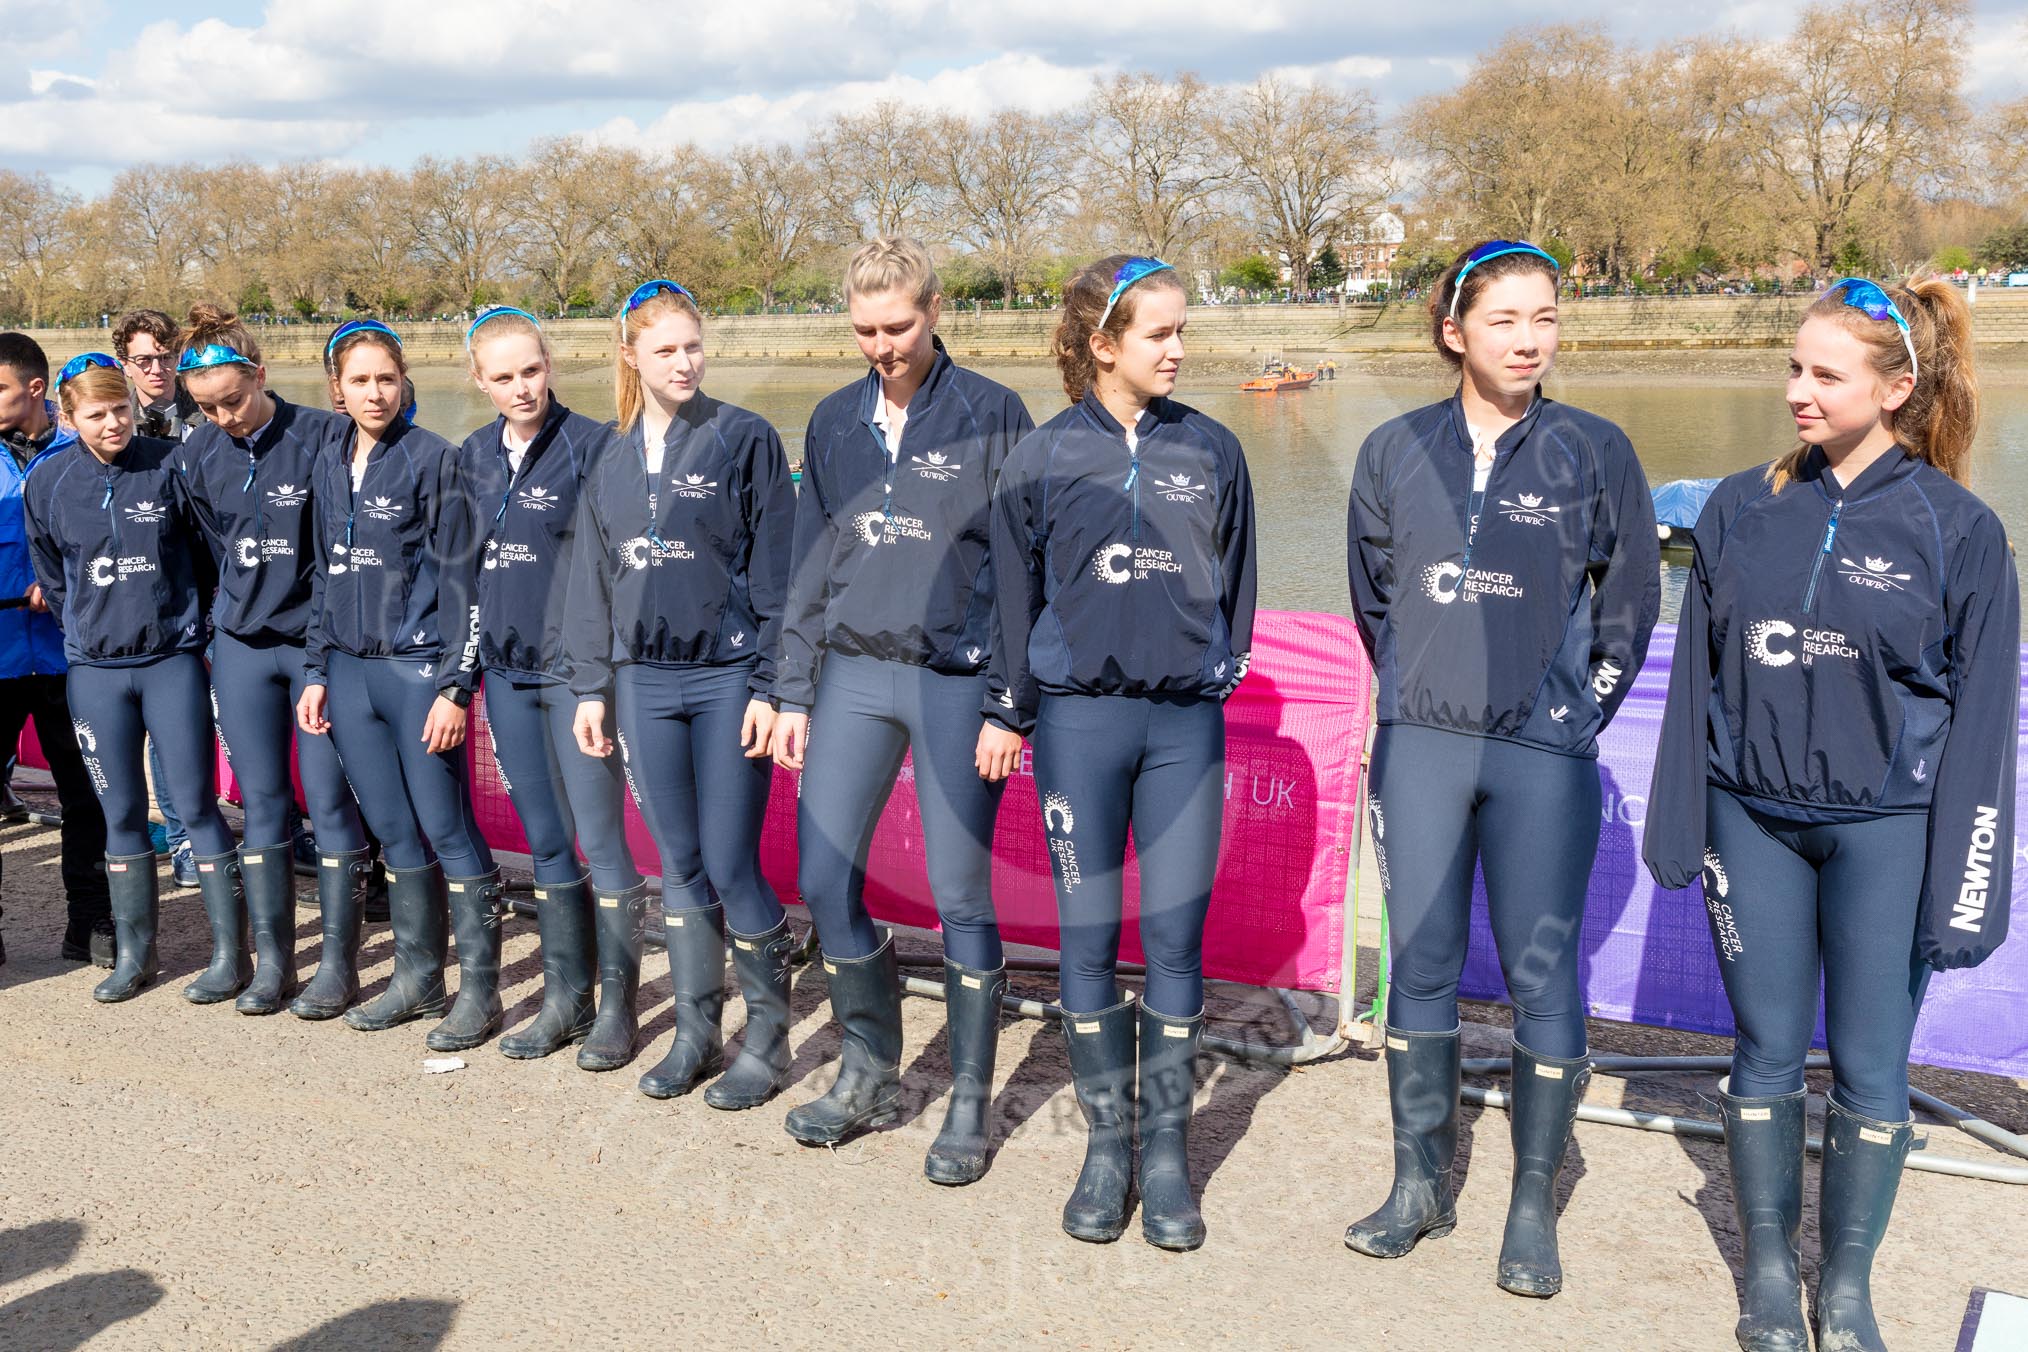 The Boat Race season 2017 -  The Cancer Research Women's Boat Race.
River Thames between Putney Bridge and Mortlake,
London SW15,

United Kingdom,
on 02 April 2017 at 14:58, image #35